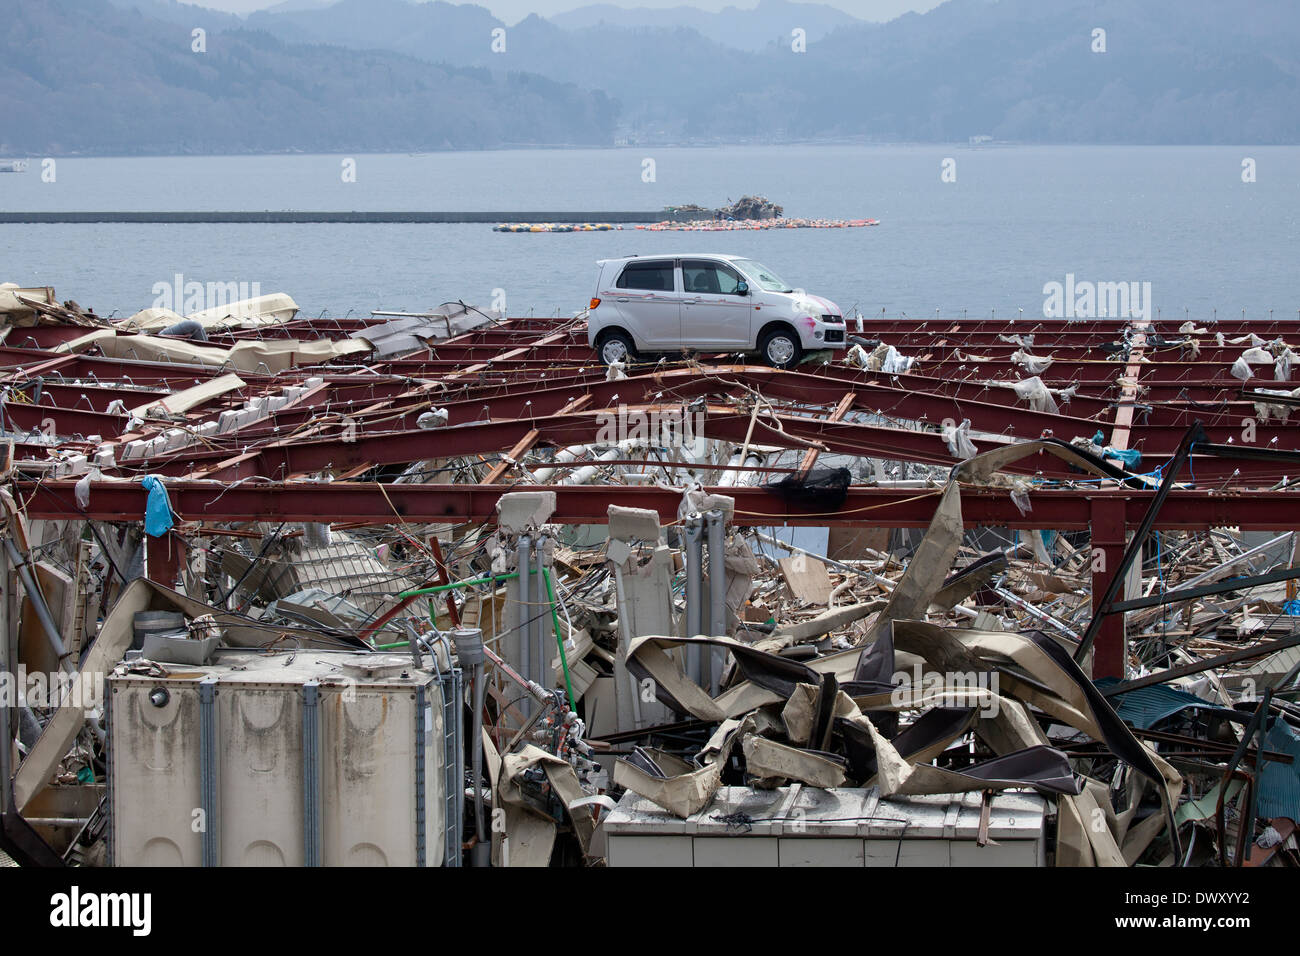 Car washed on top of building by tsunami, Iwate, Japan Stock Photo